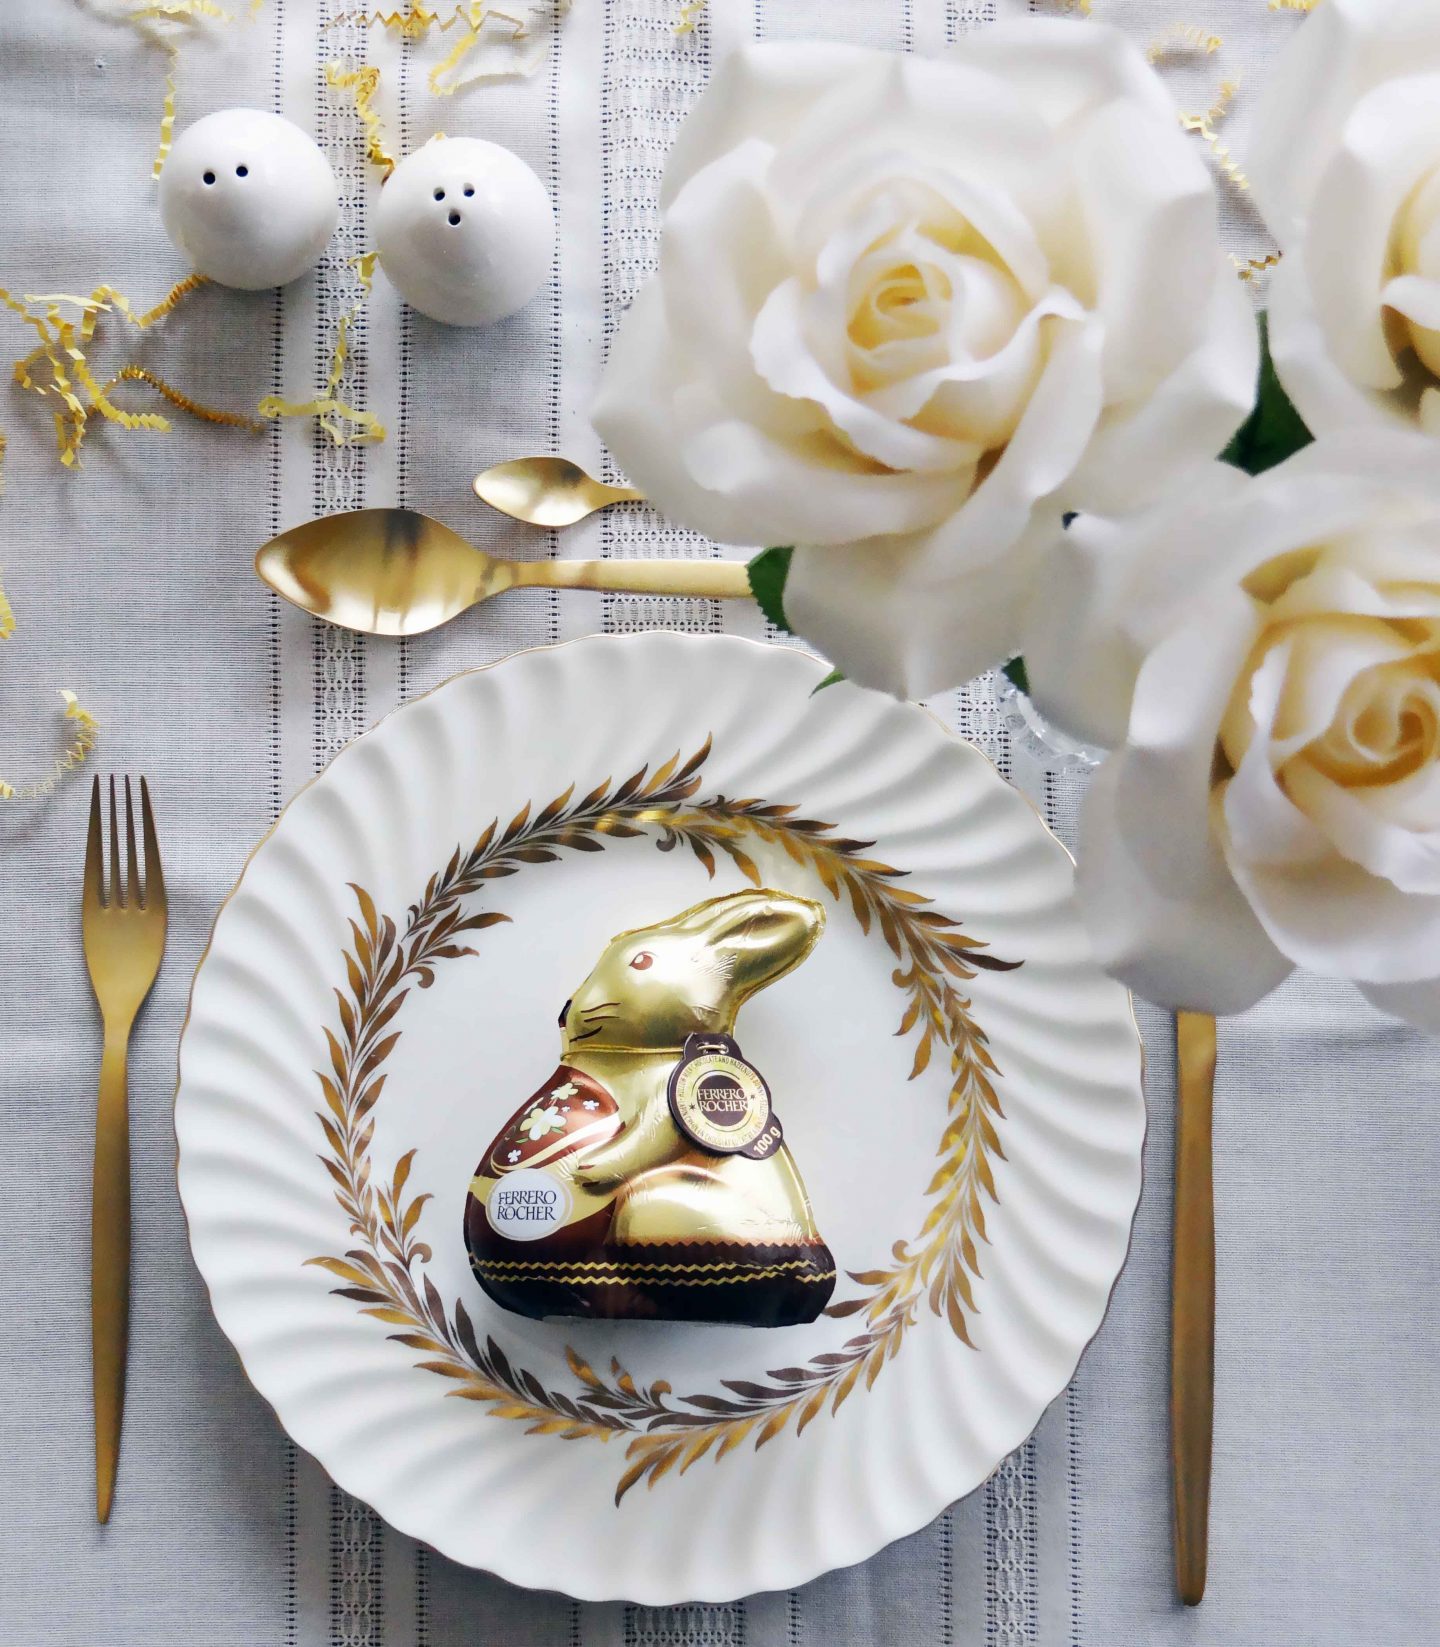 Ferrero Rocher, Entertaining, Chocolates, The best chocolate, Easter, White and Gold, Tablescape, Table Setting, Table Styling, Decorating for a party, Easter Decor,